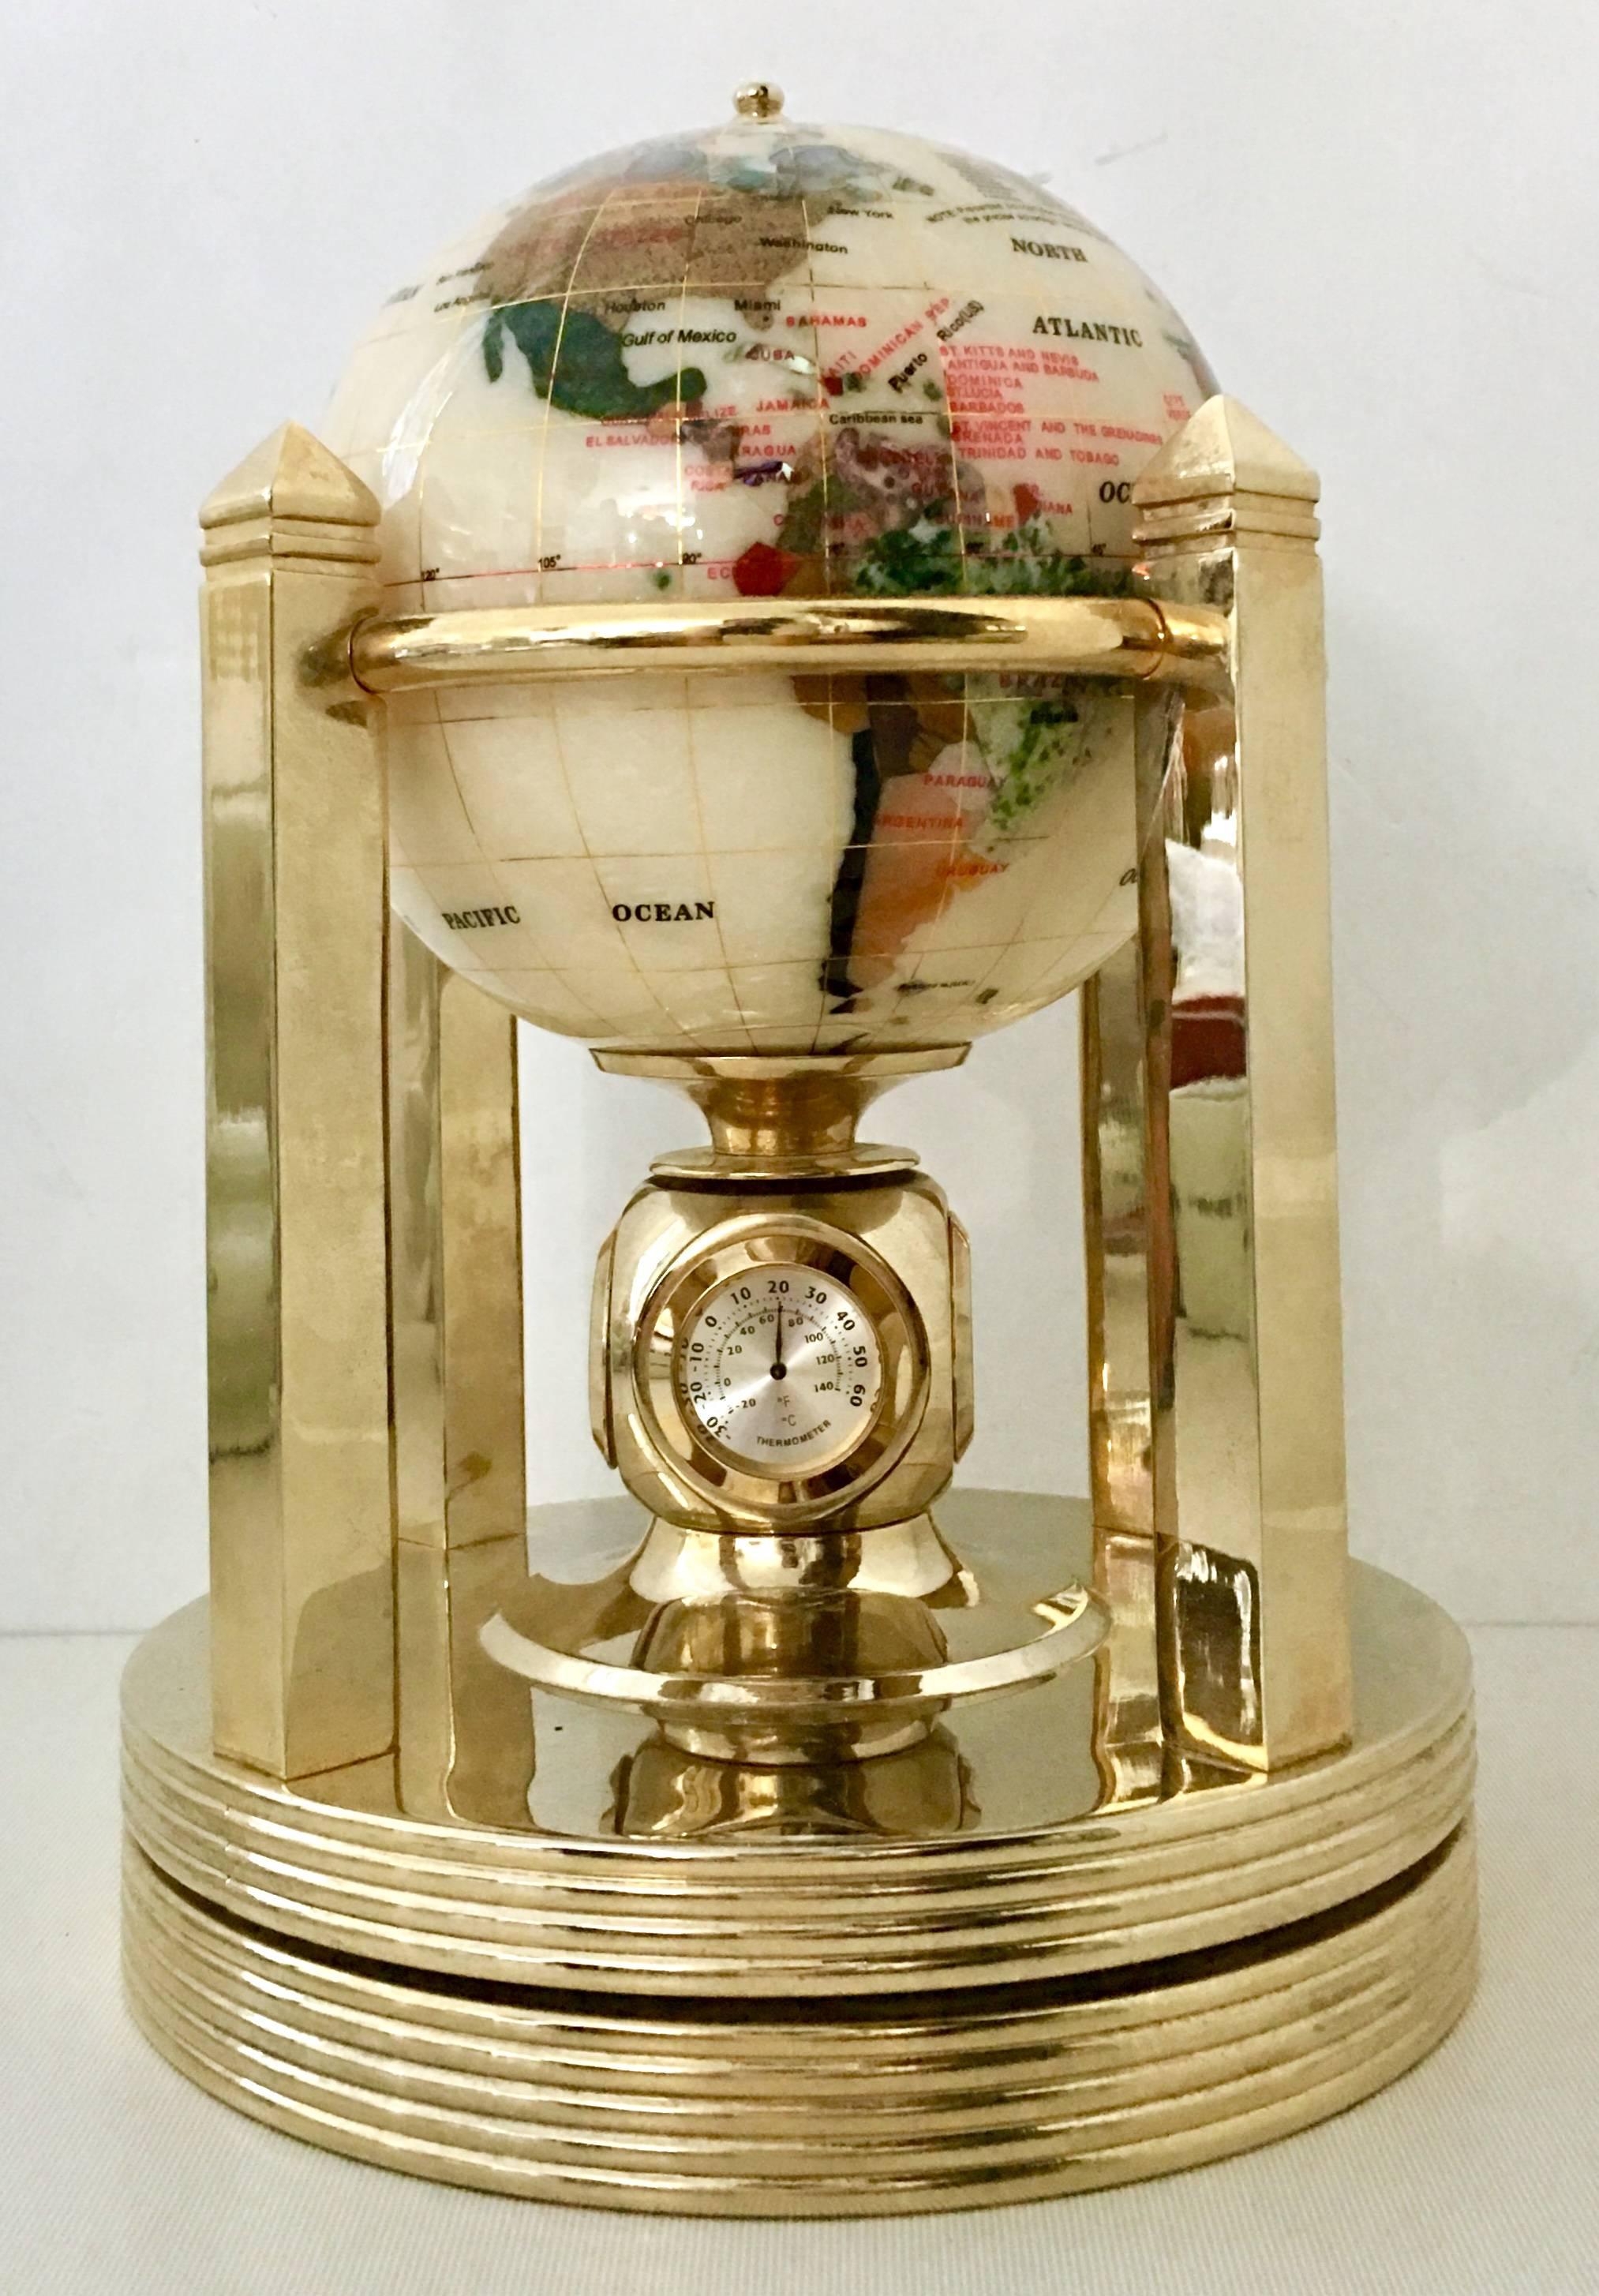 Contemporary mother-of-pearl and semi precious inlaid stone 24-karat gold plated rotating globe on Stand. This 6